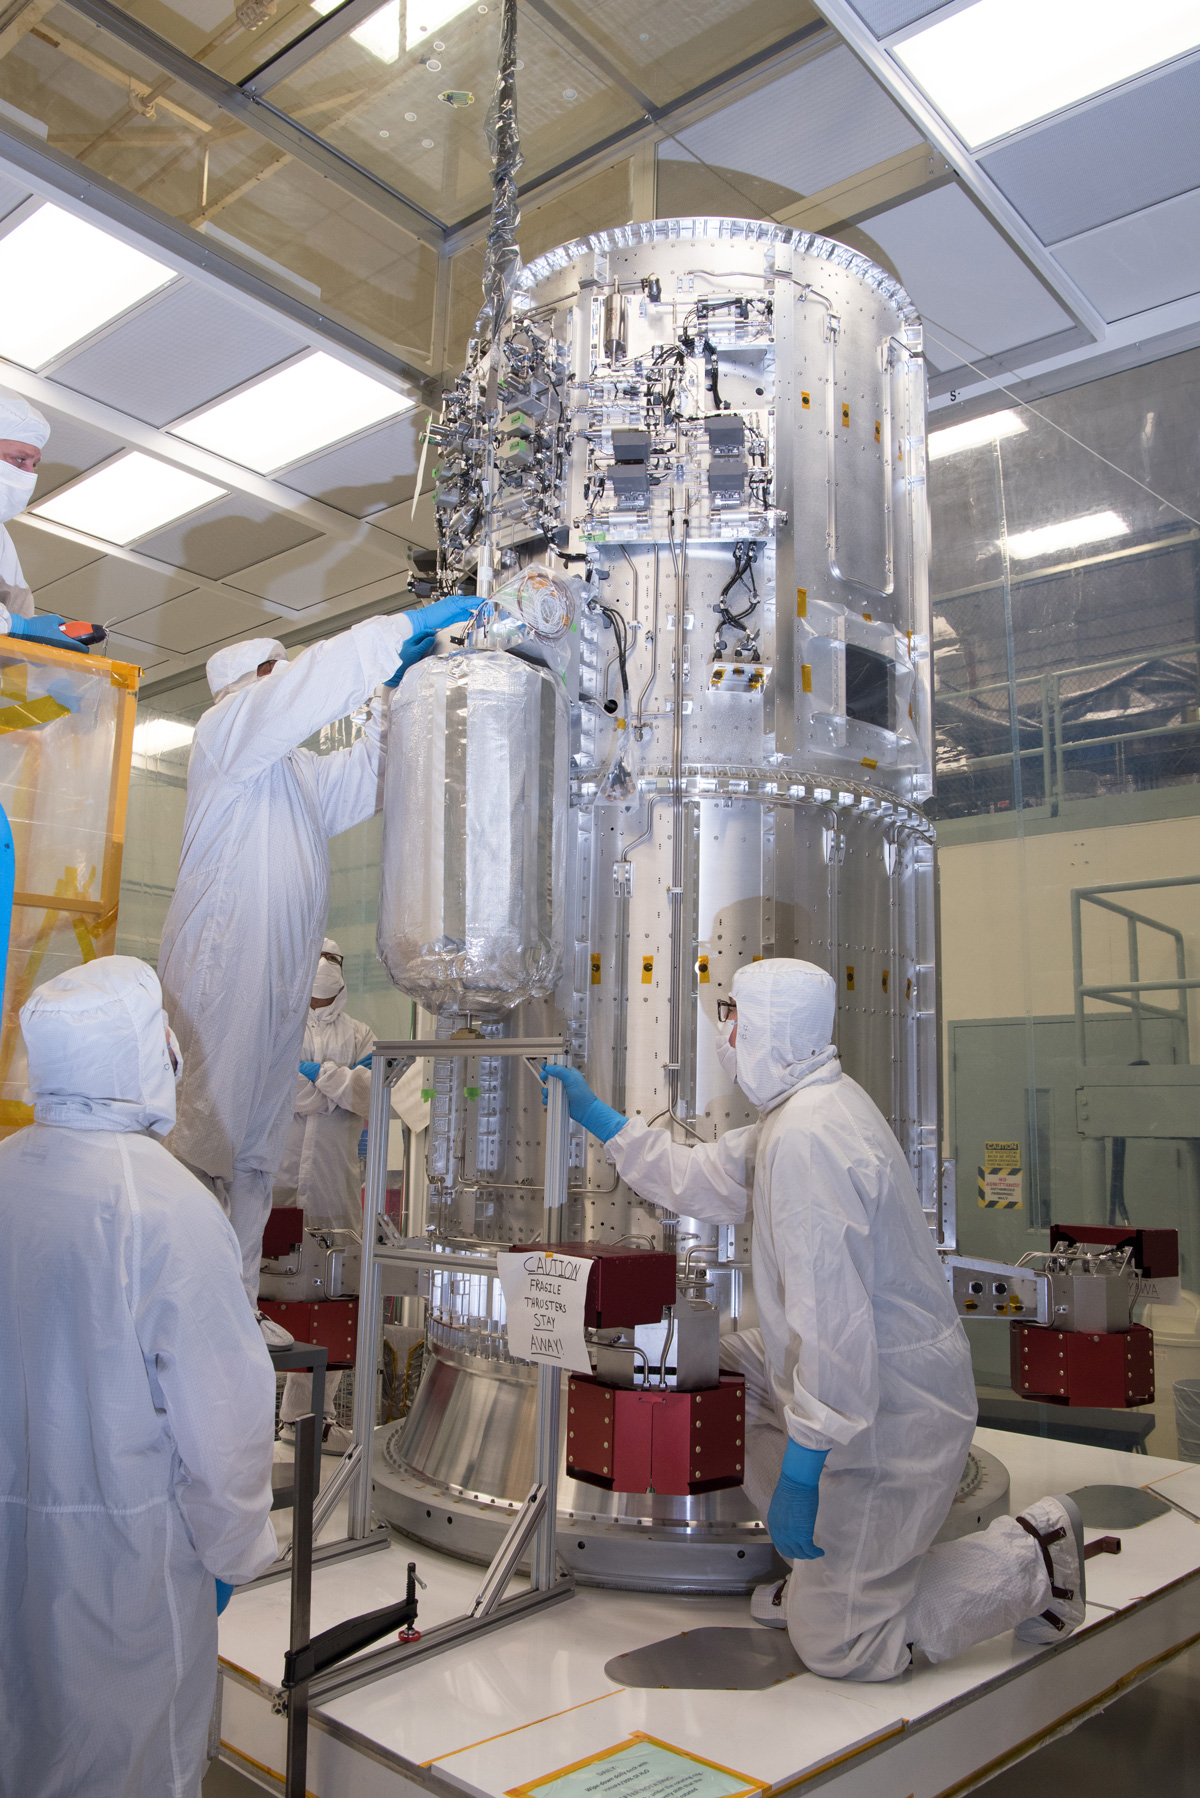 Engineers and technicians in a clean room at NASA's Goddard Space Flight Center in Greenbelt, Maryland, integrate the tanks that will contain helium onto the propulsion module of NASA's Europa Clipper spacecraft.